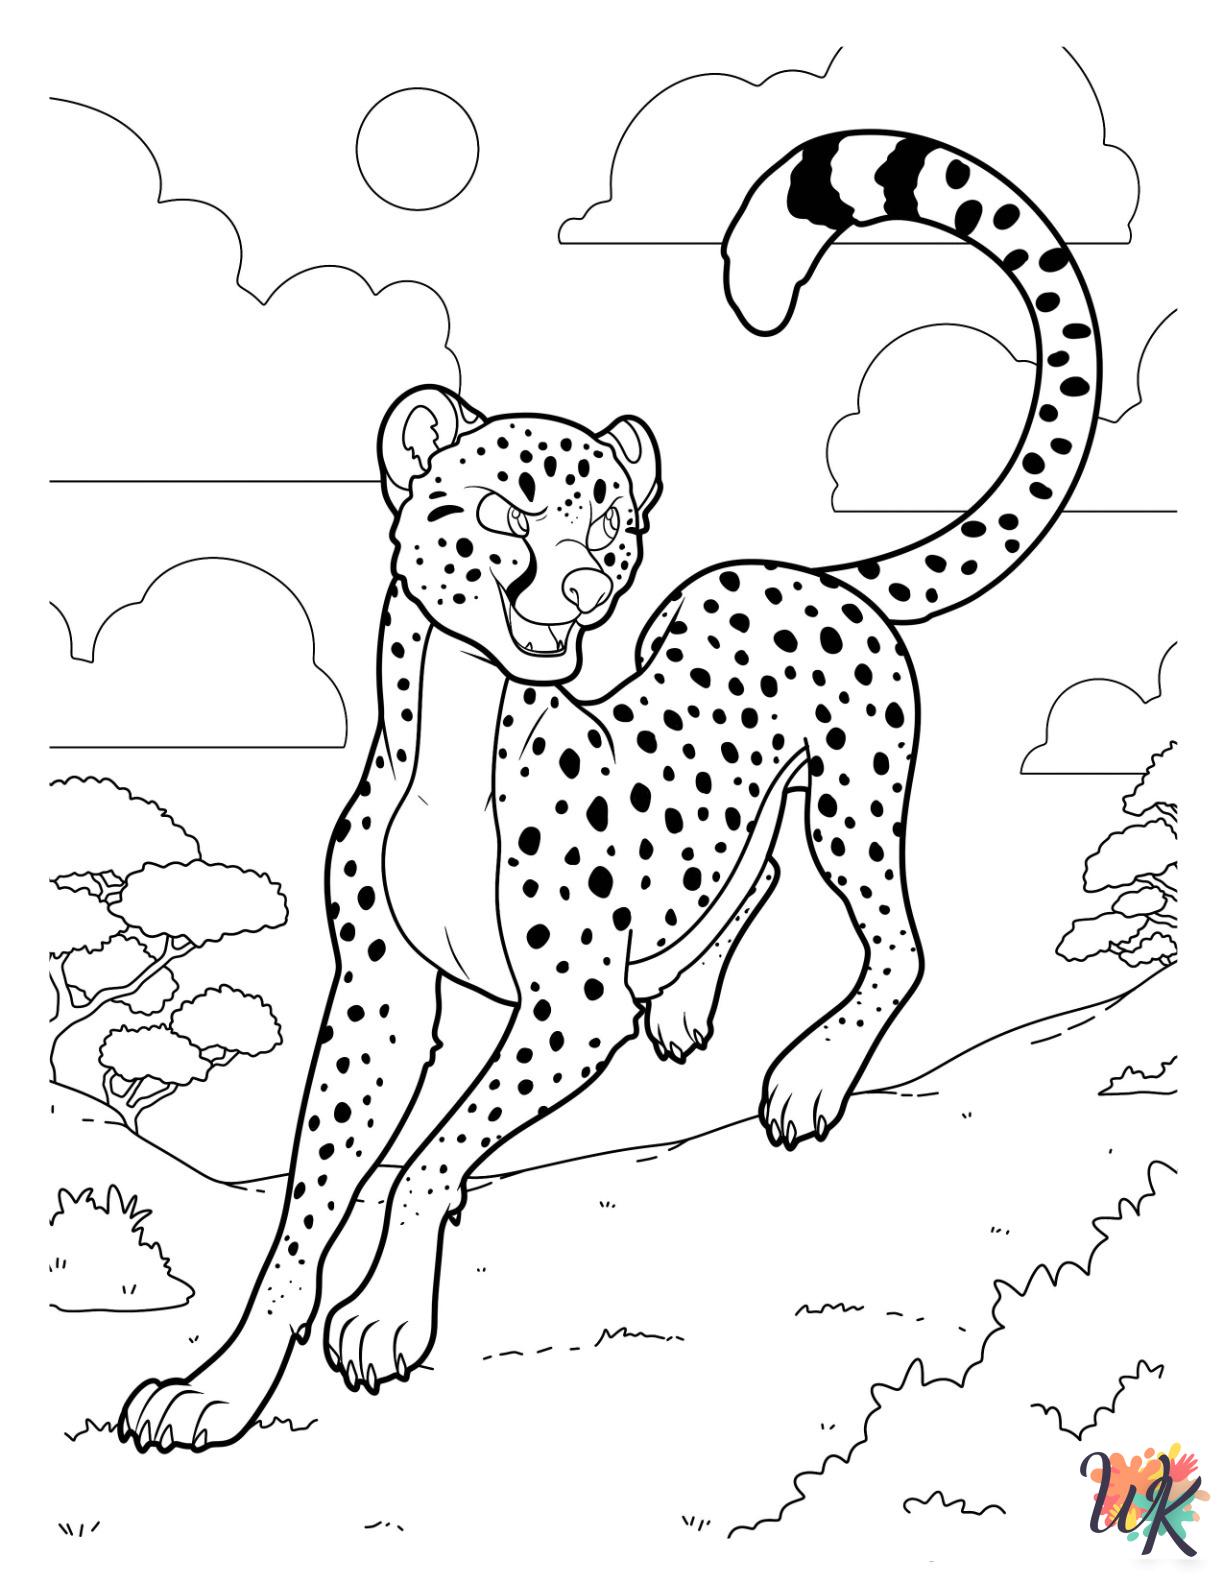 Cheetah coloring pages for adults